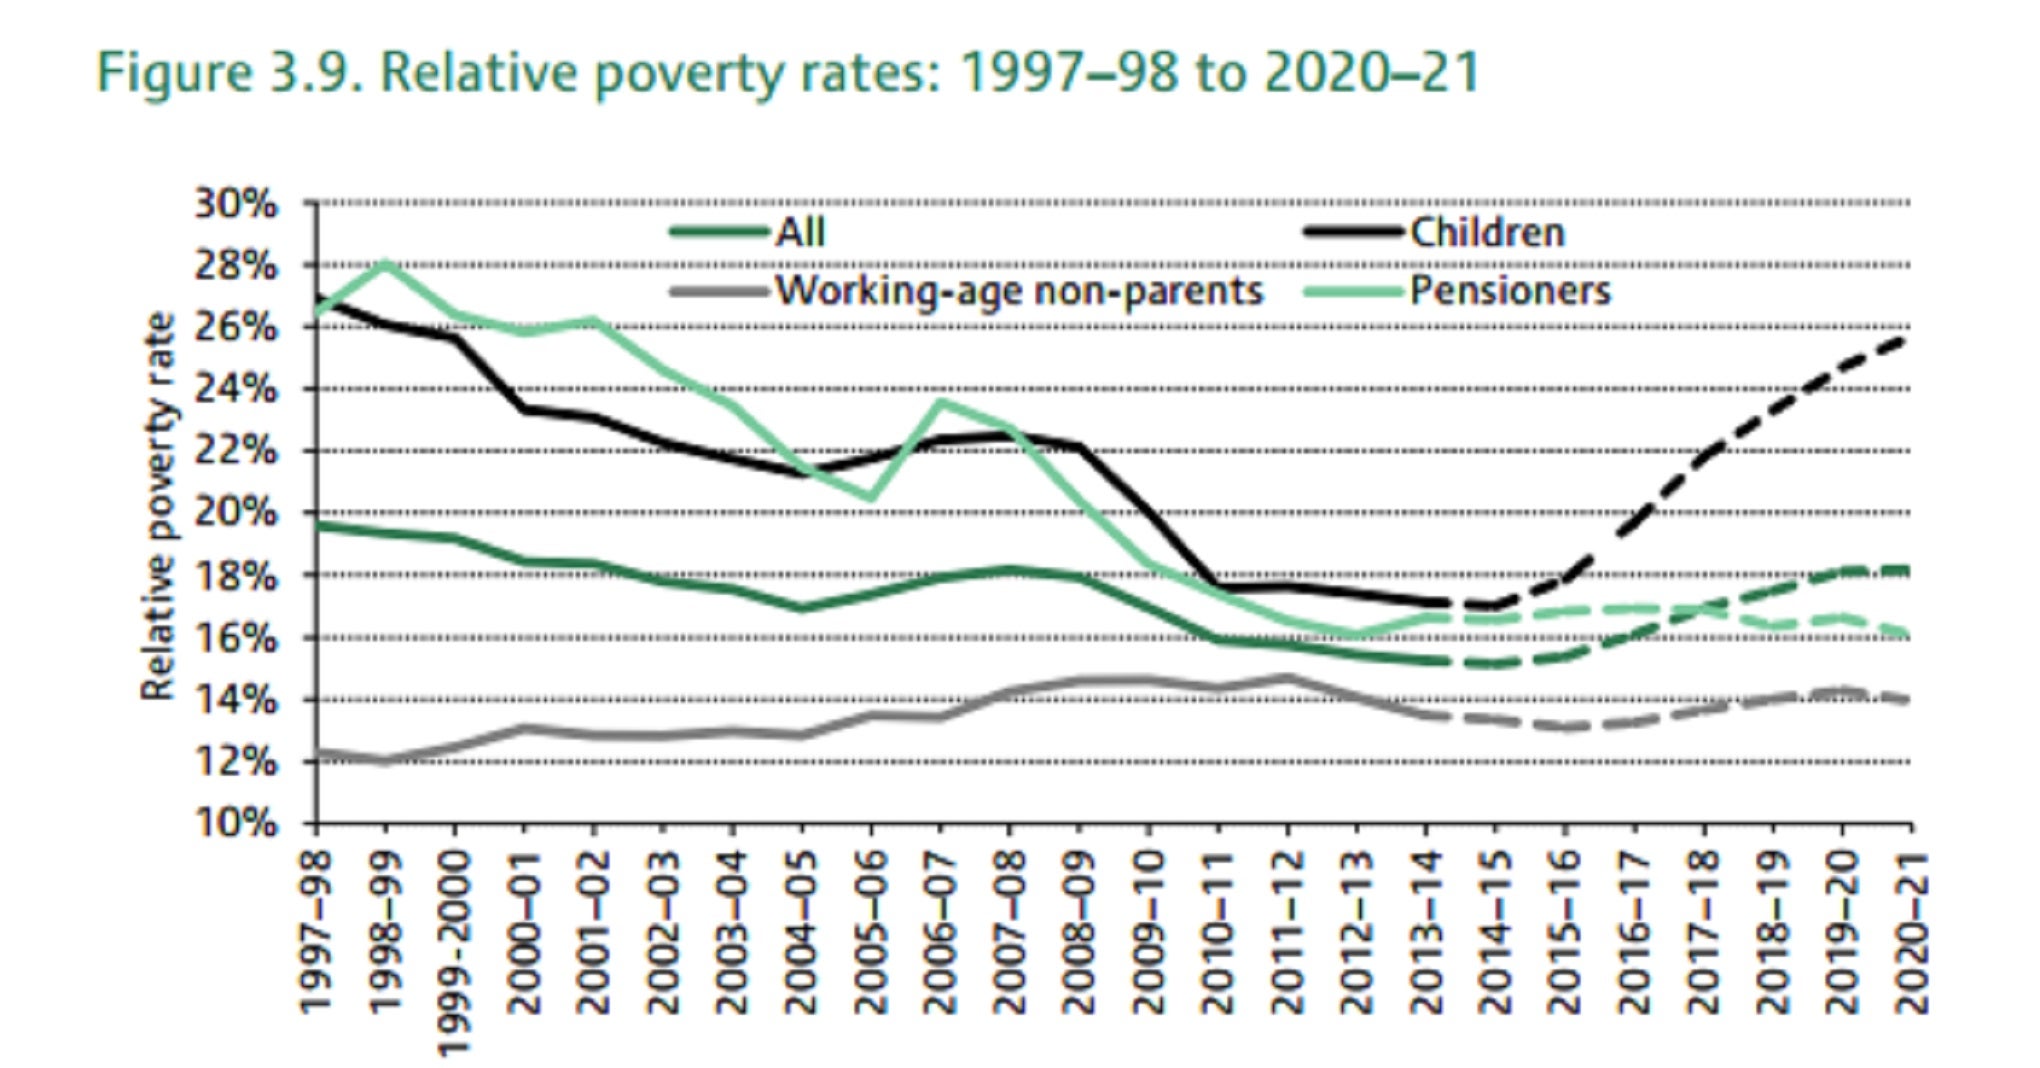 2013 Poverty Guidelines Chart